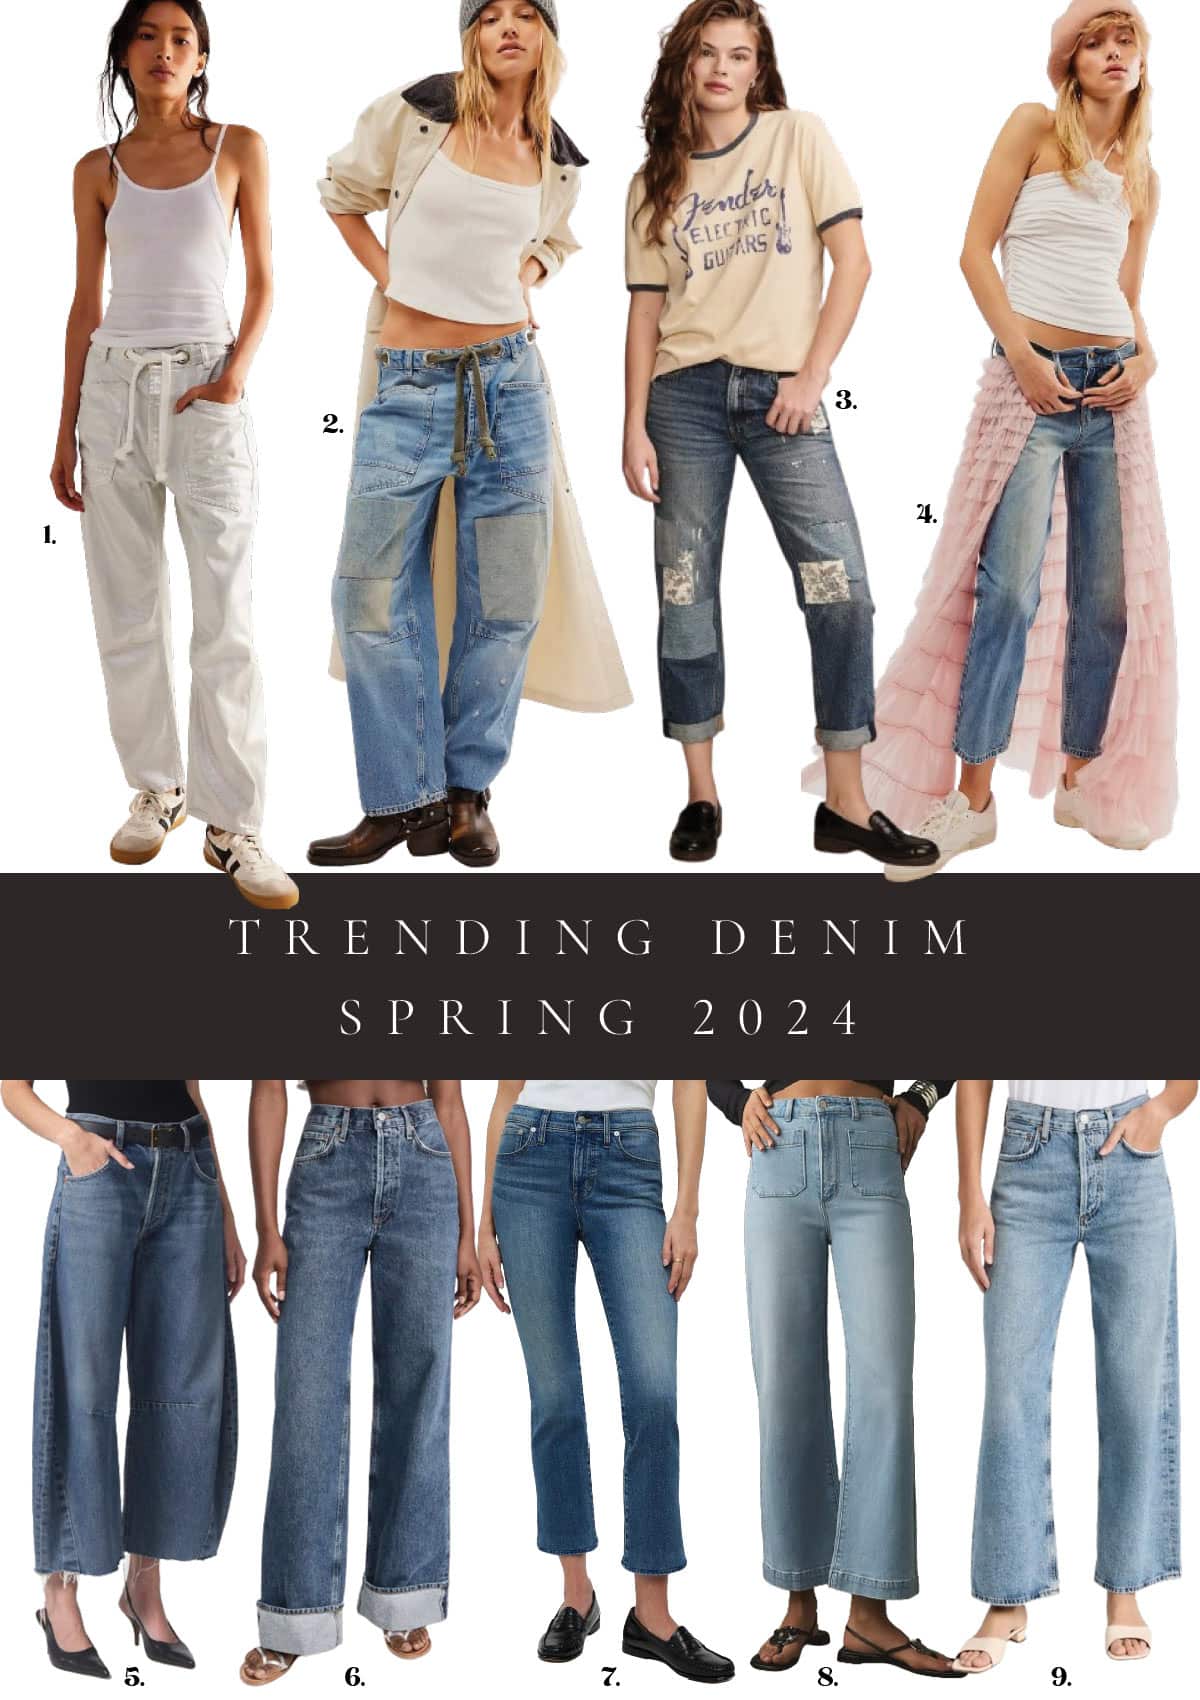 Spring Fashion Trends 2024 - Elevated Denim Jeans